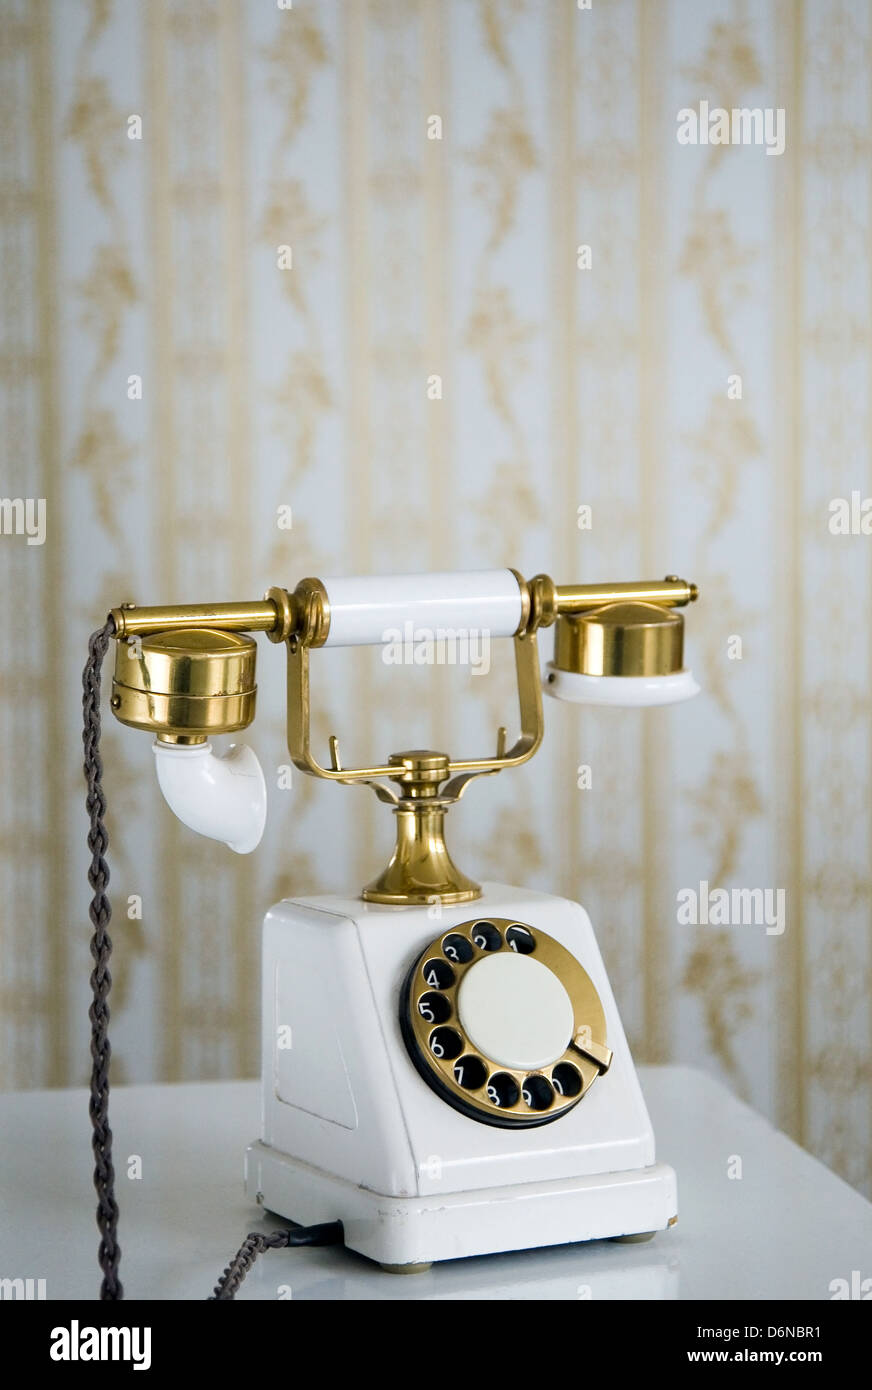 Berlin, Germany, antique phone from old-fashioned wallpaper Stock Photo -  Alamy